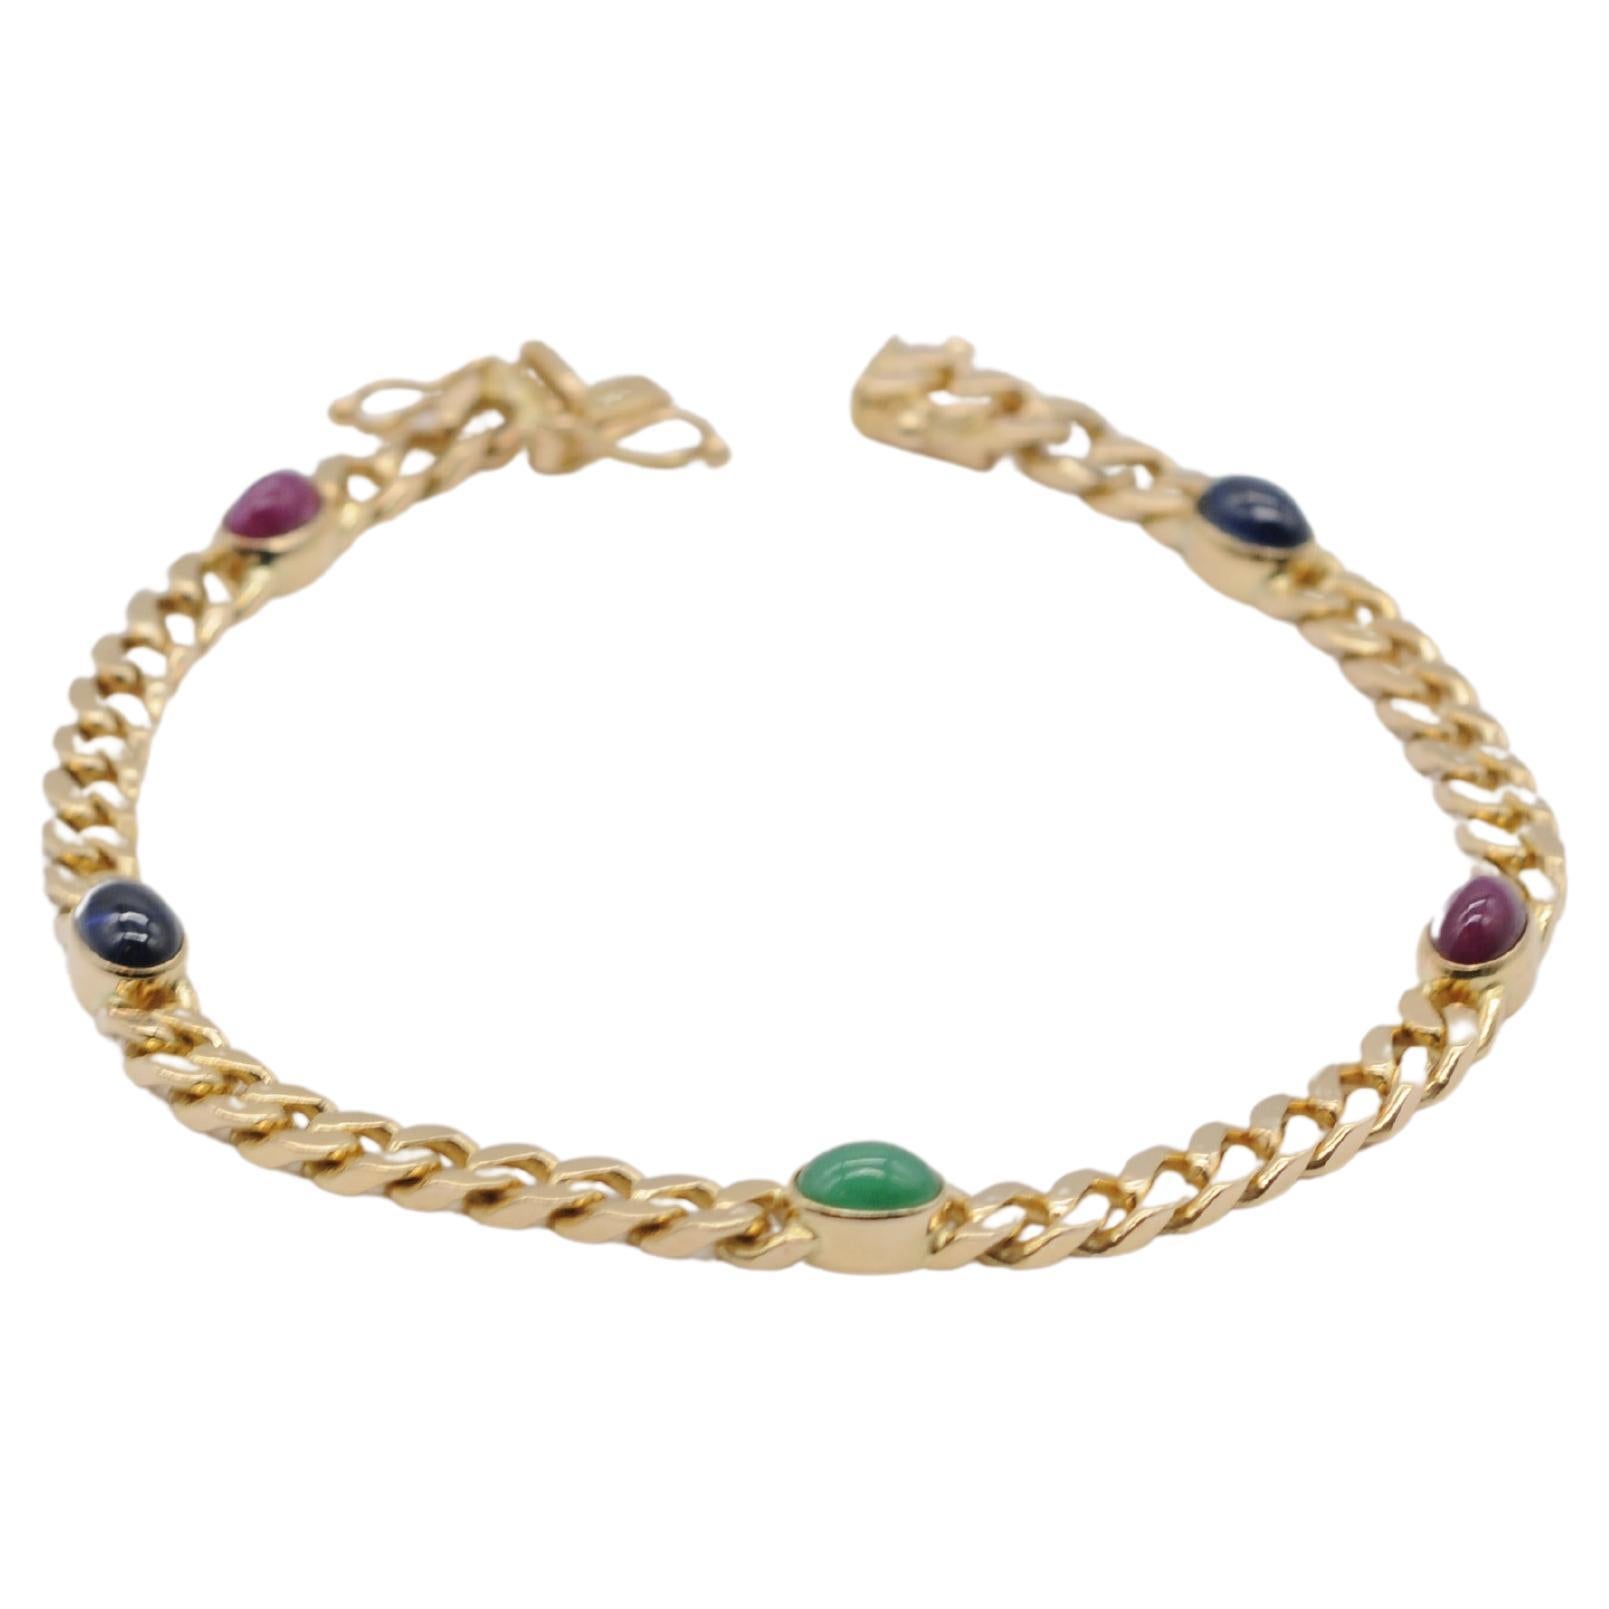 Noble 14k yellow gold bracelet with cabochon For Sale 8